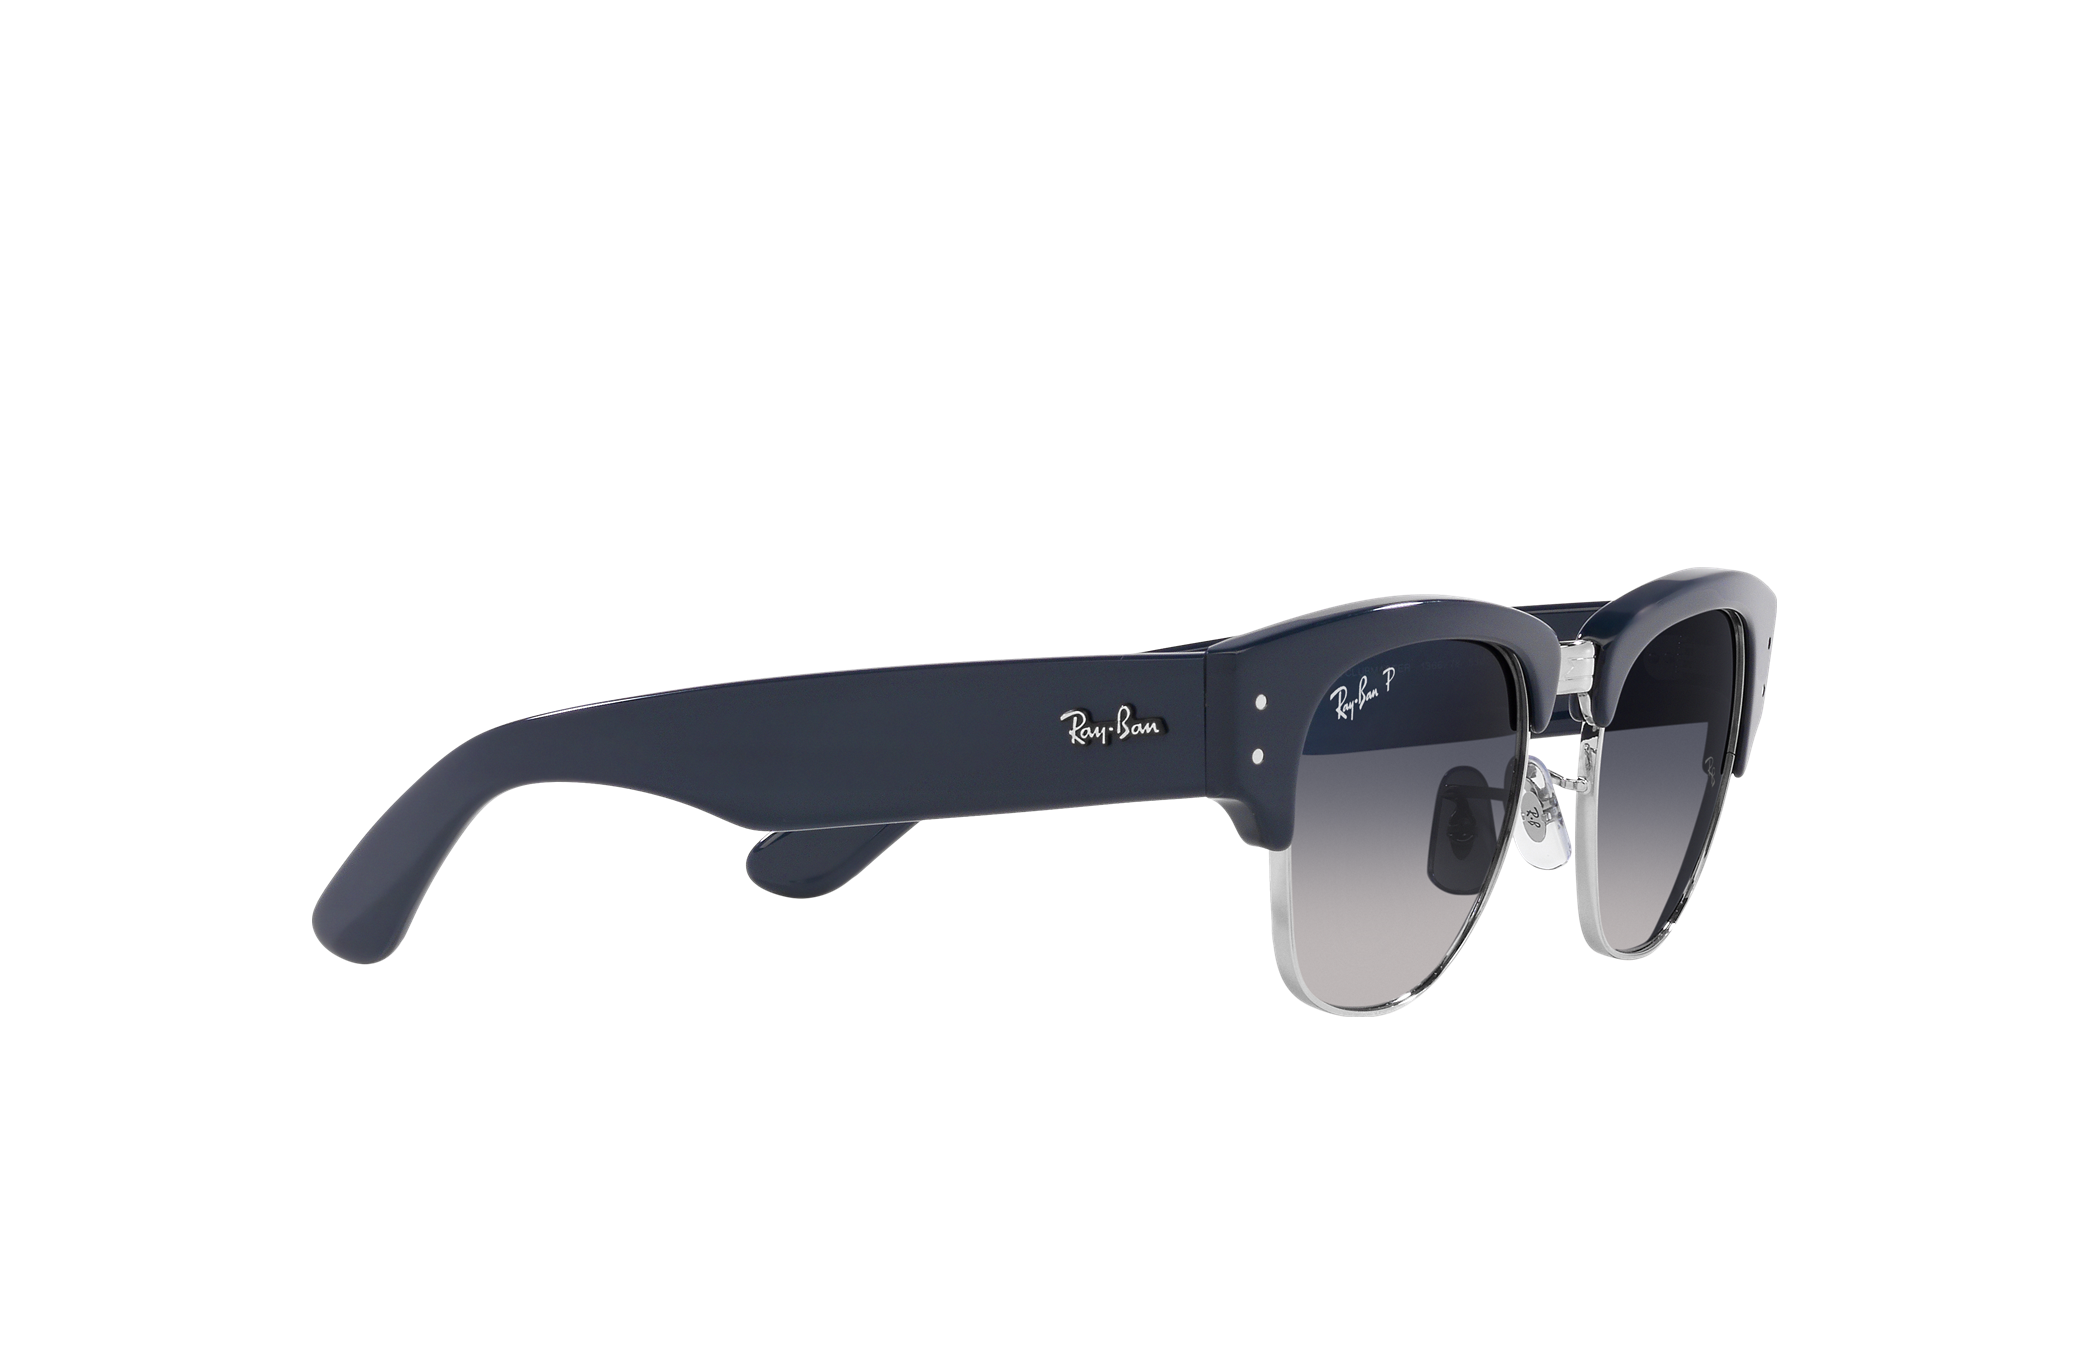 Ray-Ban Clubmaster Oversized sunglasses in black | Sunglasses features, Clubmaster  sunglasses, Sunglasses